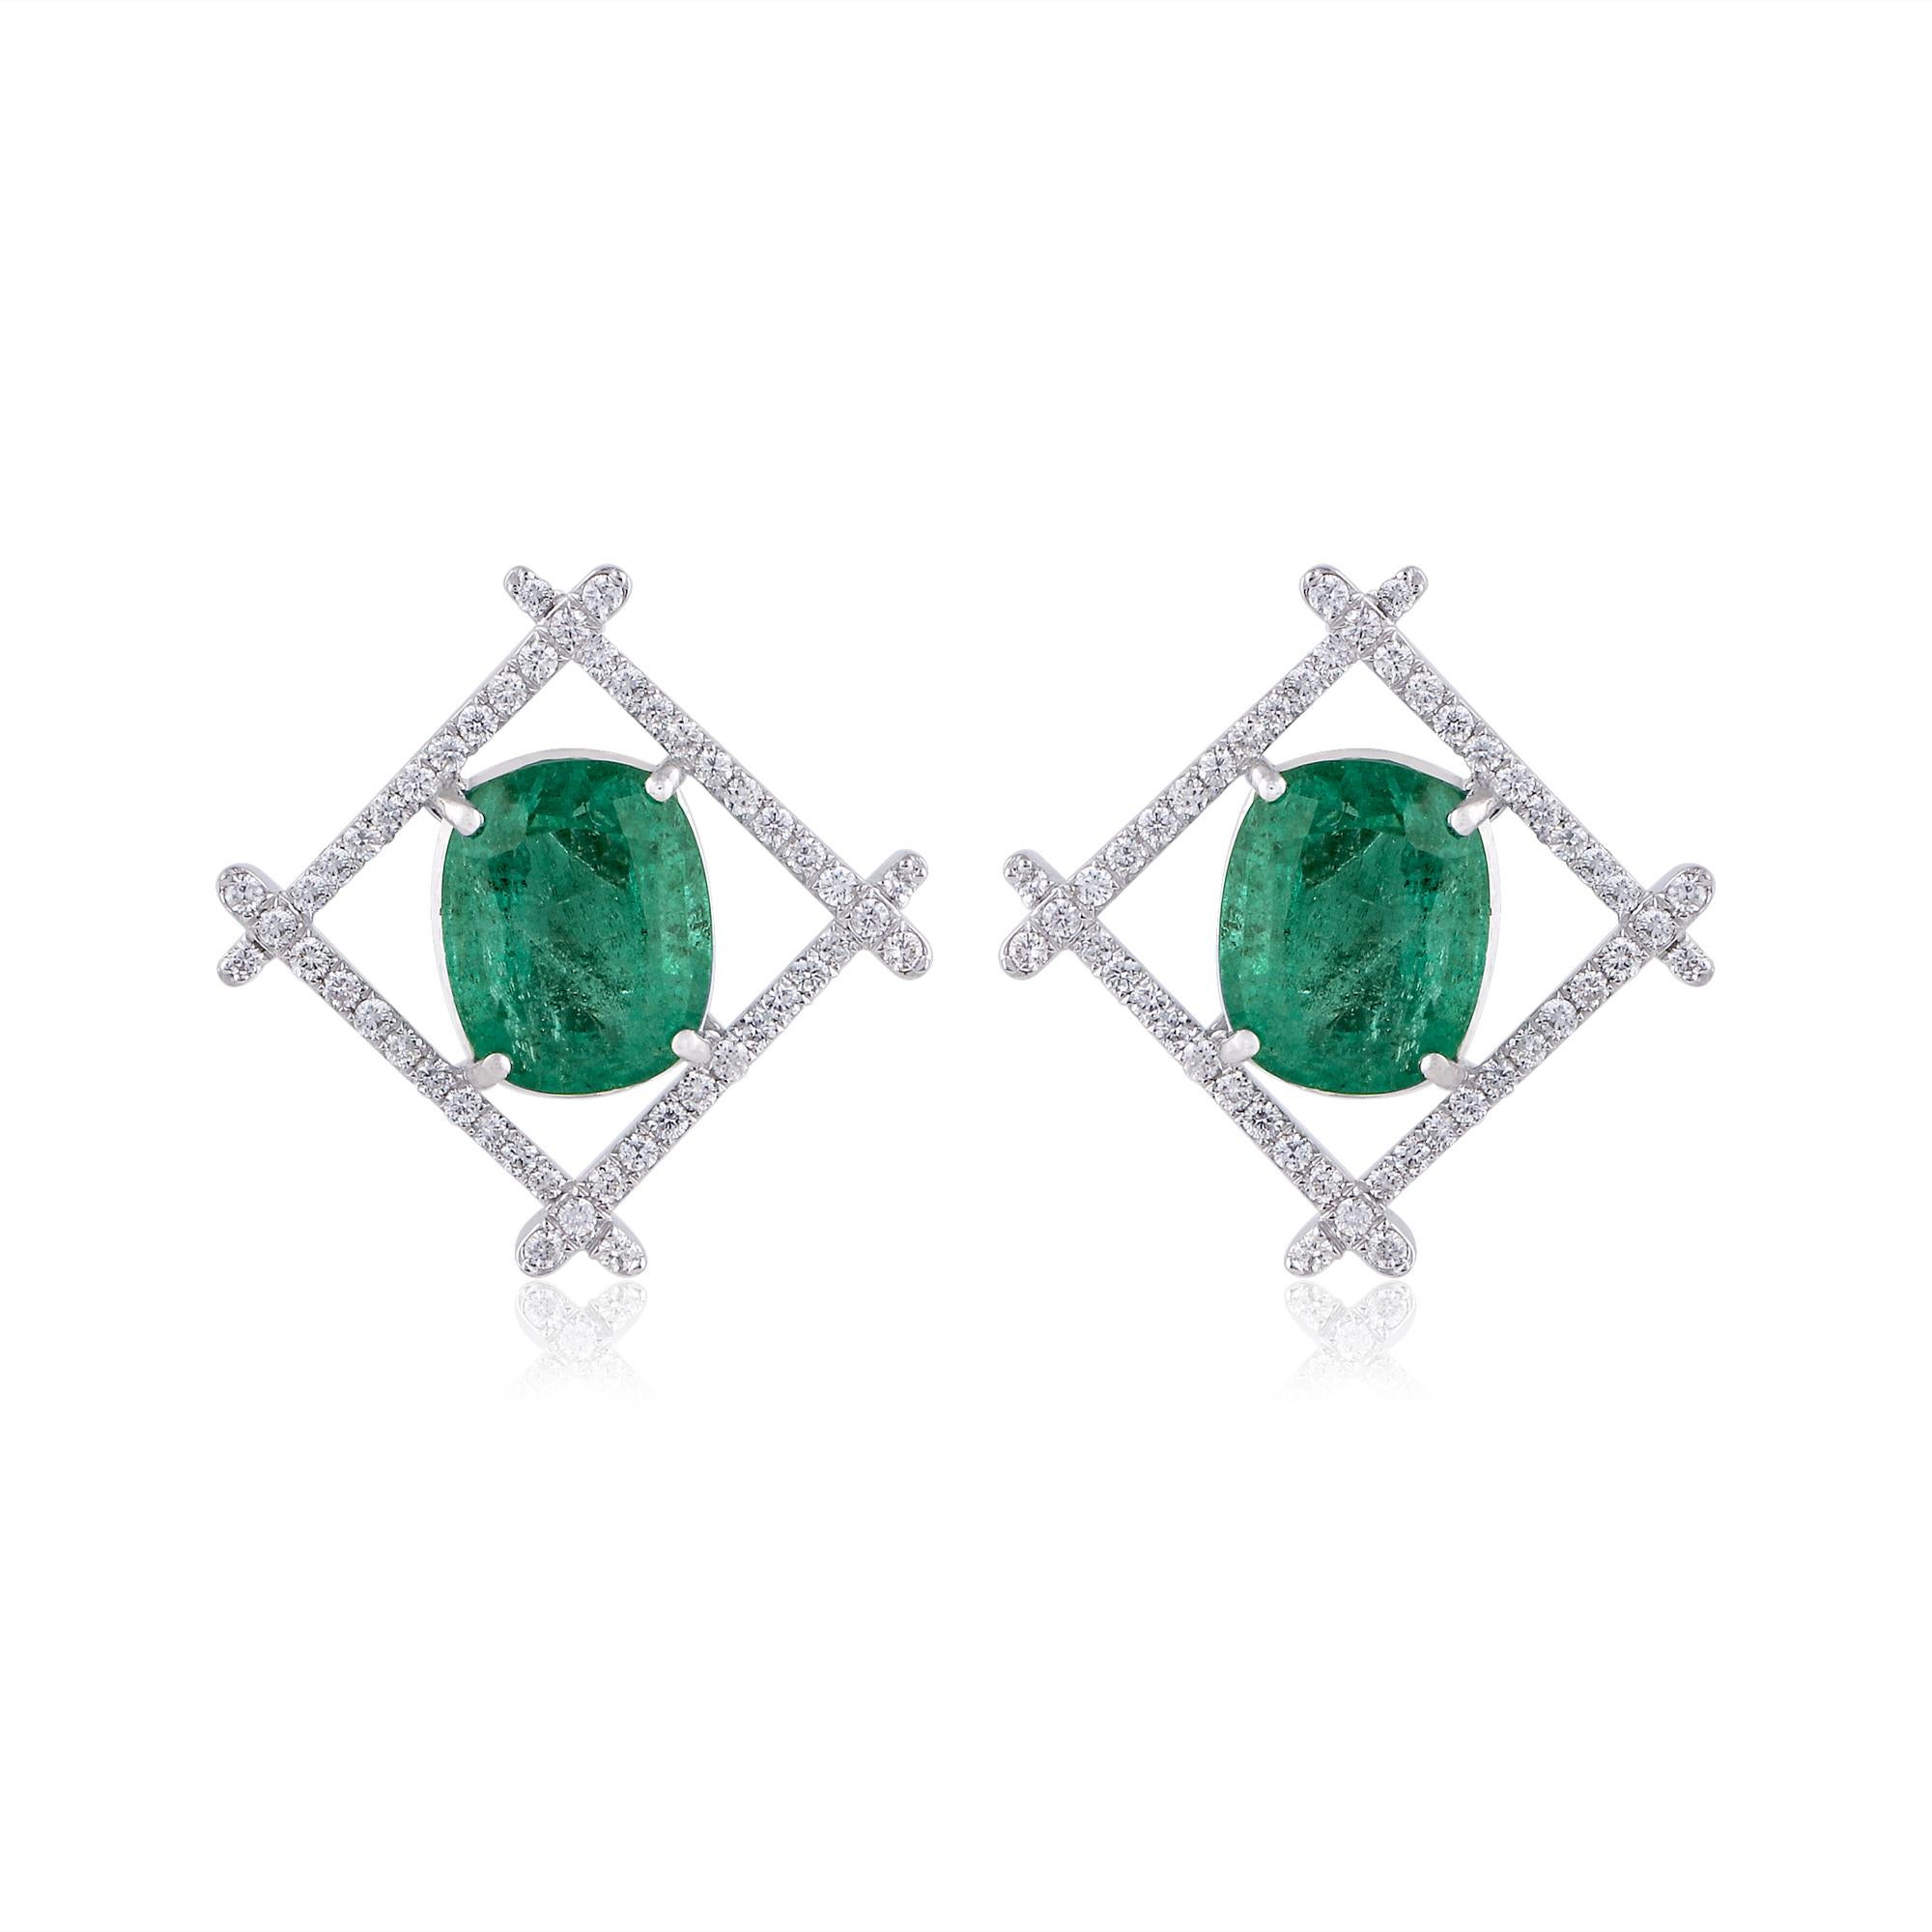 Item Code :- CN-32421
Gross Wt. :- 7.95 gm
18k White Gold Wt. :- 6.47 gm
Natural Diamond Wt. :- 0.70 Ct. ( AVERAGE DIAMOND CLARITY SI1-SI2 & COLOR H-I )
Emerald Wt. :- 6.72 Ct.

✦ Sizing
.....................
We can adjust most items to fit your